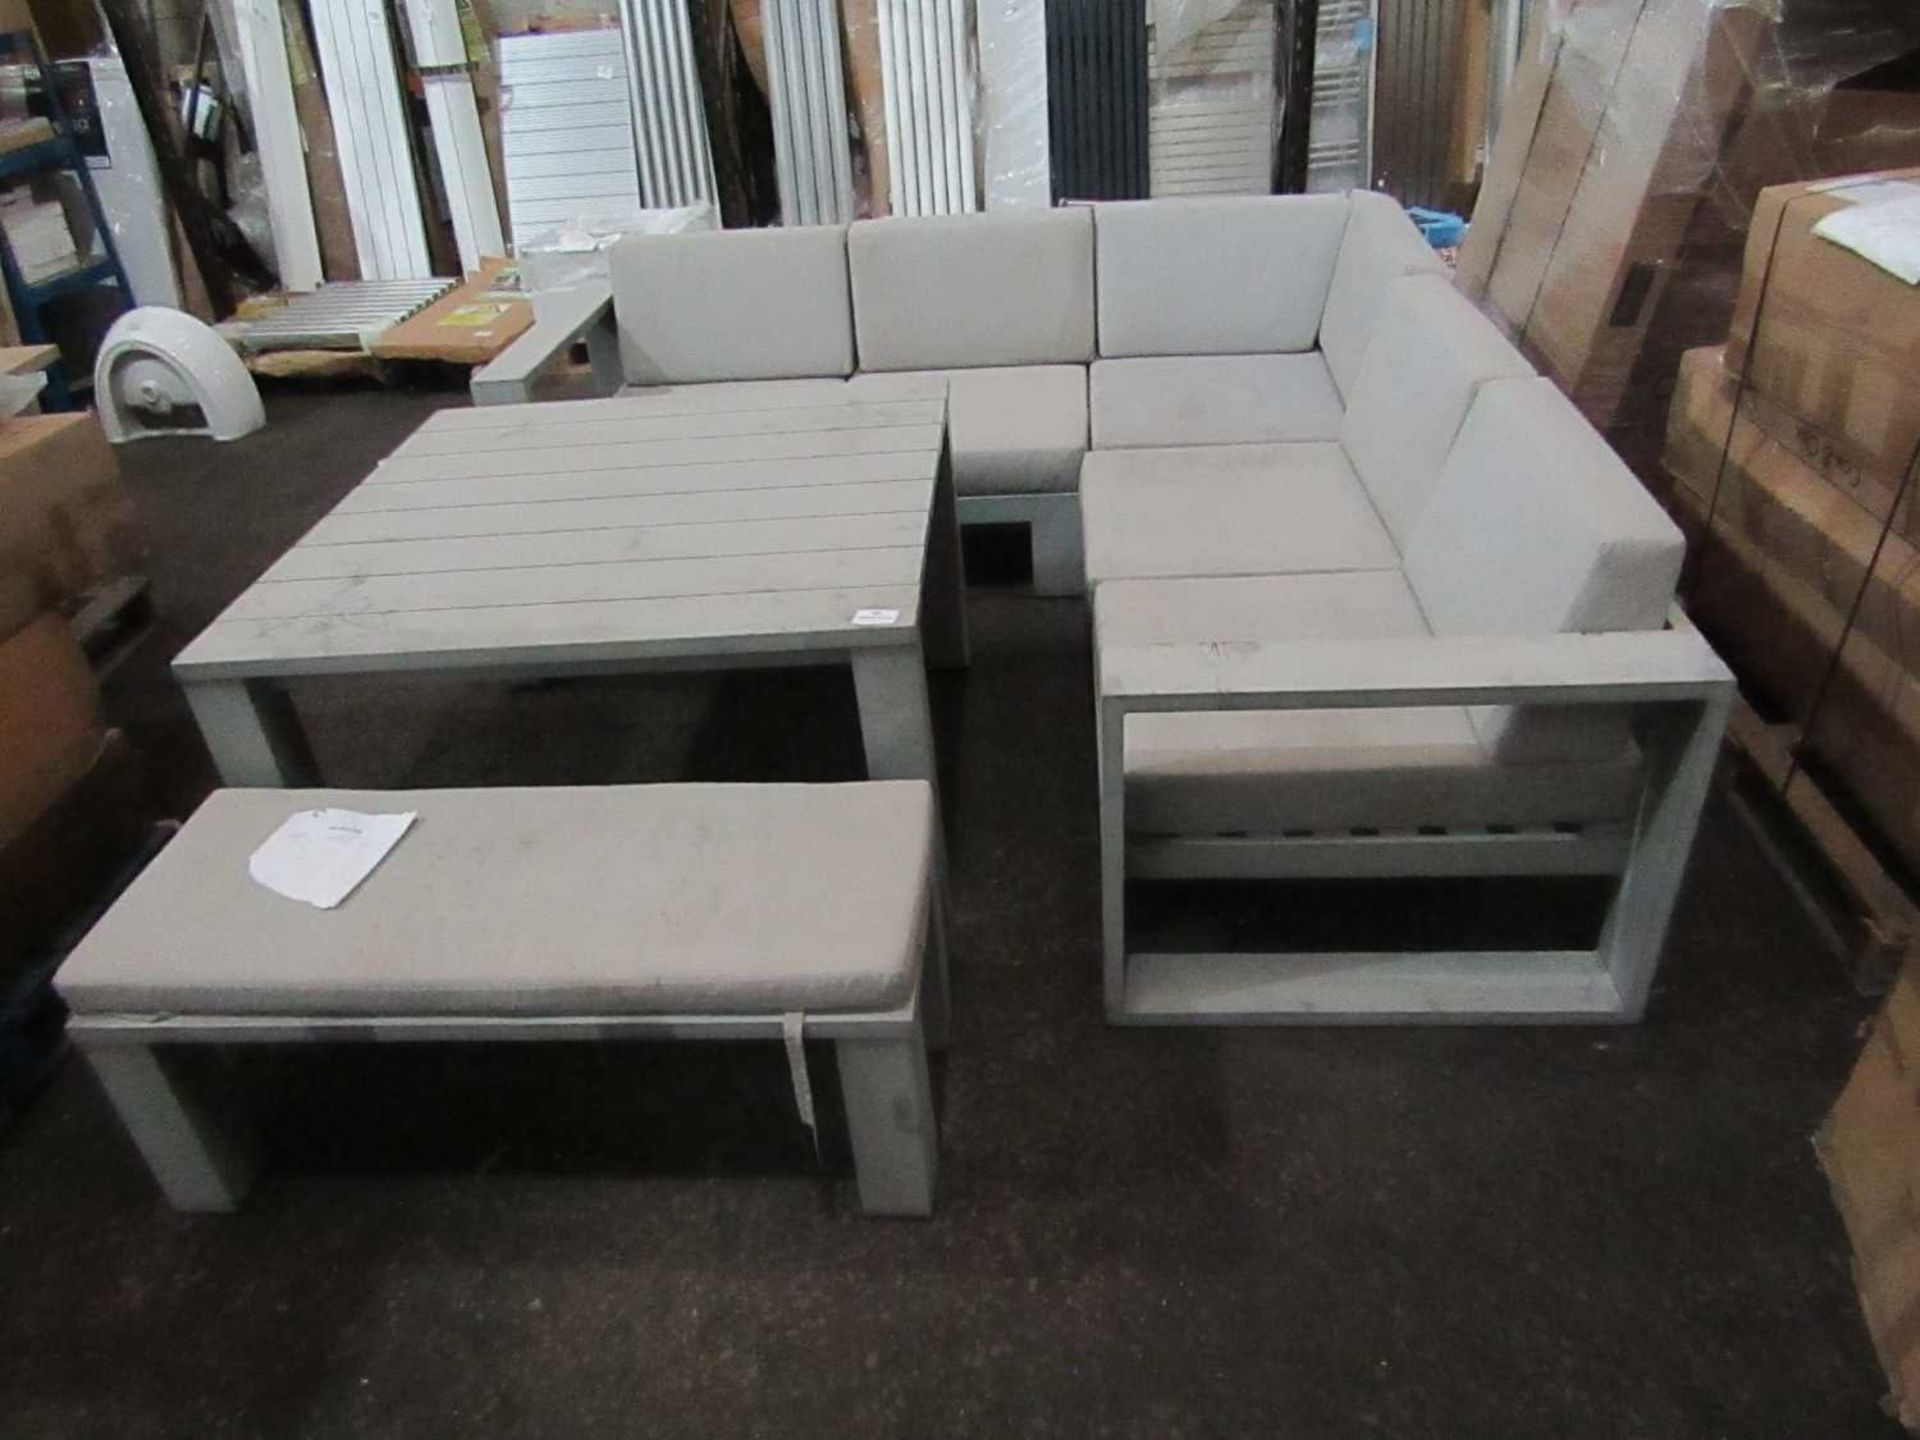 VAT 1x Cox & Cox Outdoor Corner Set - Used Condition, Repaint is suggested - RRP £- - Image 2 of 2